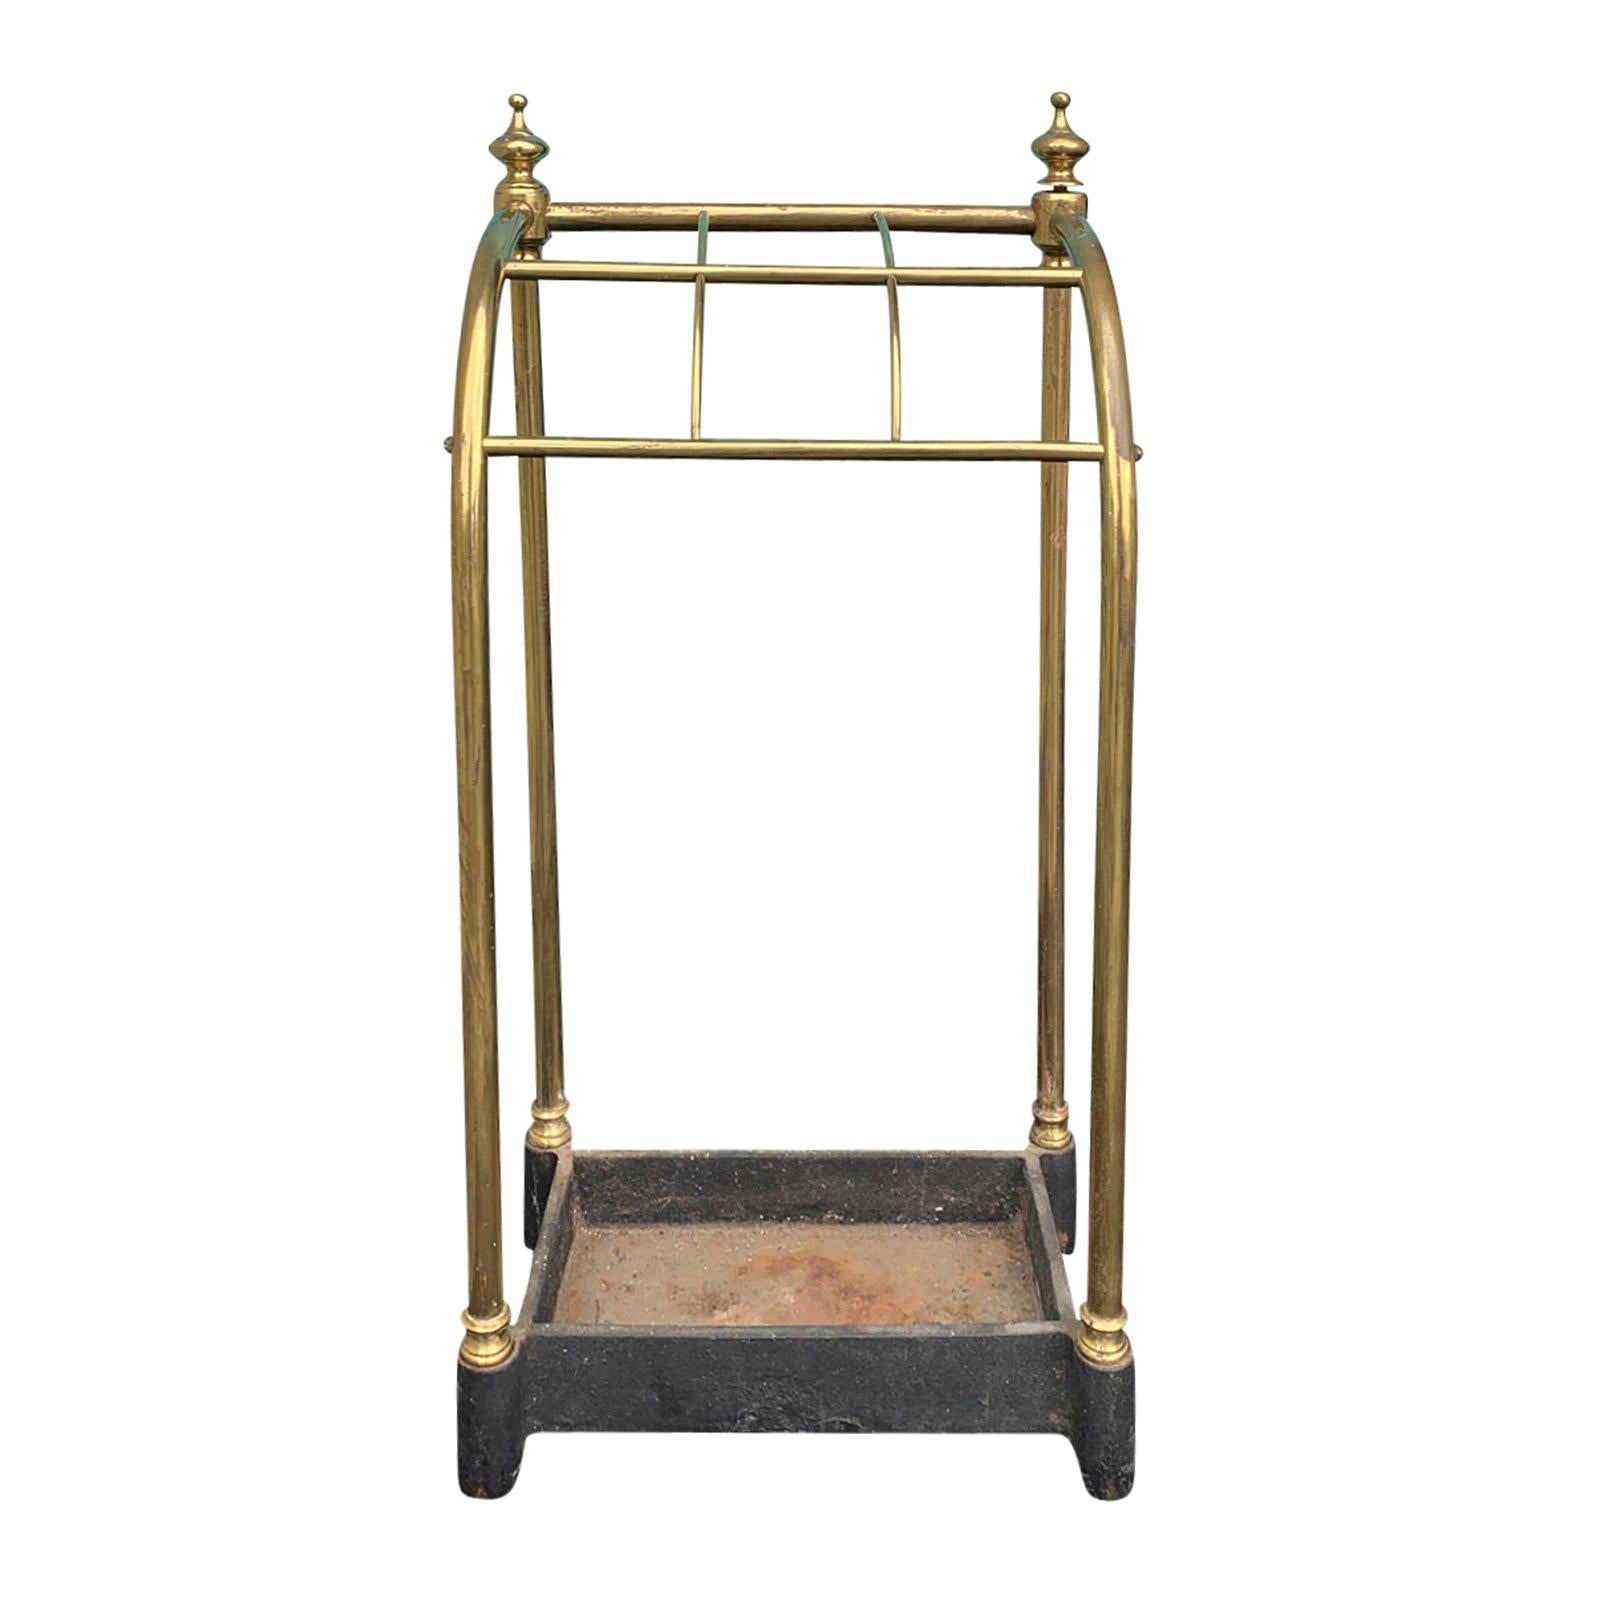 19th Century English Brass and Iron Umbrella Stand, Curved Top